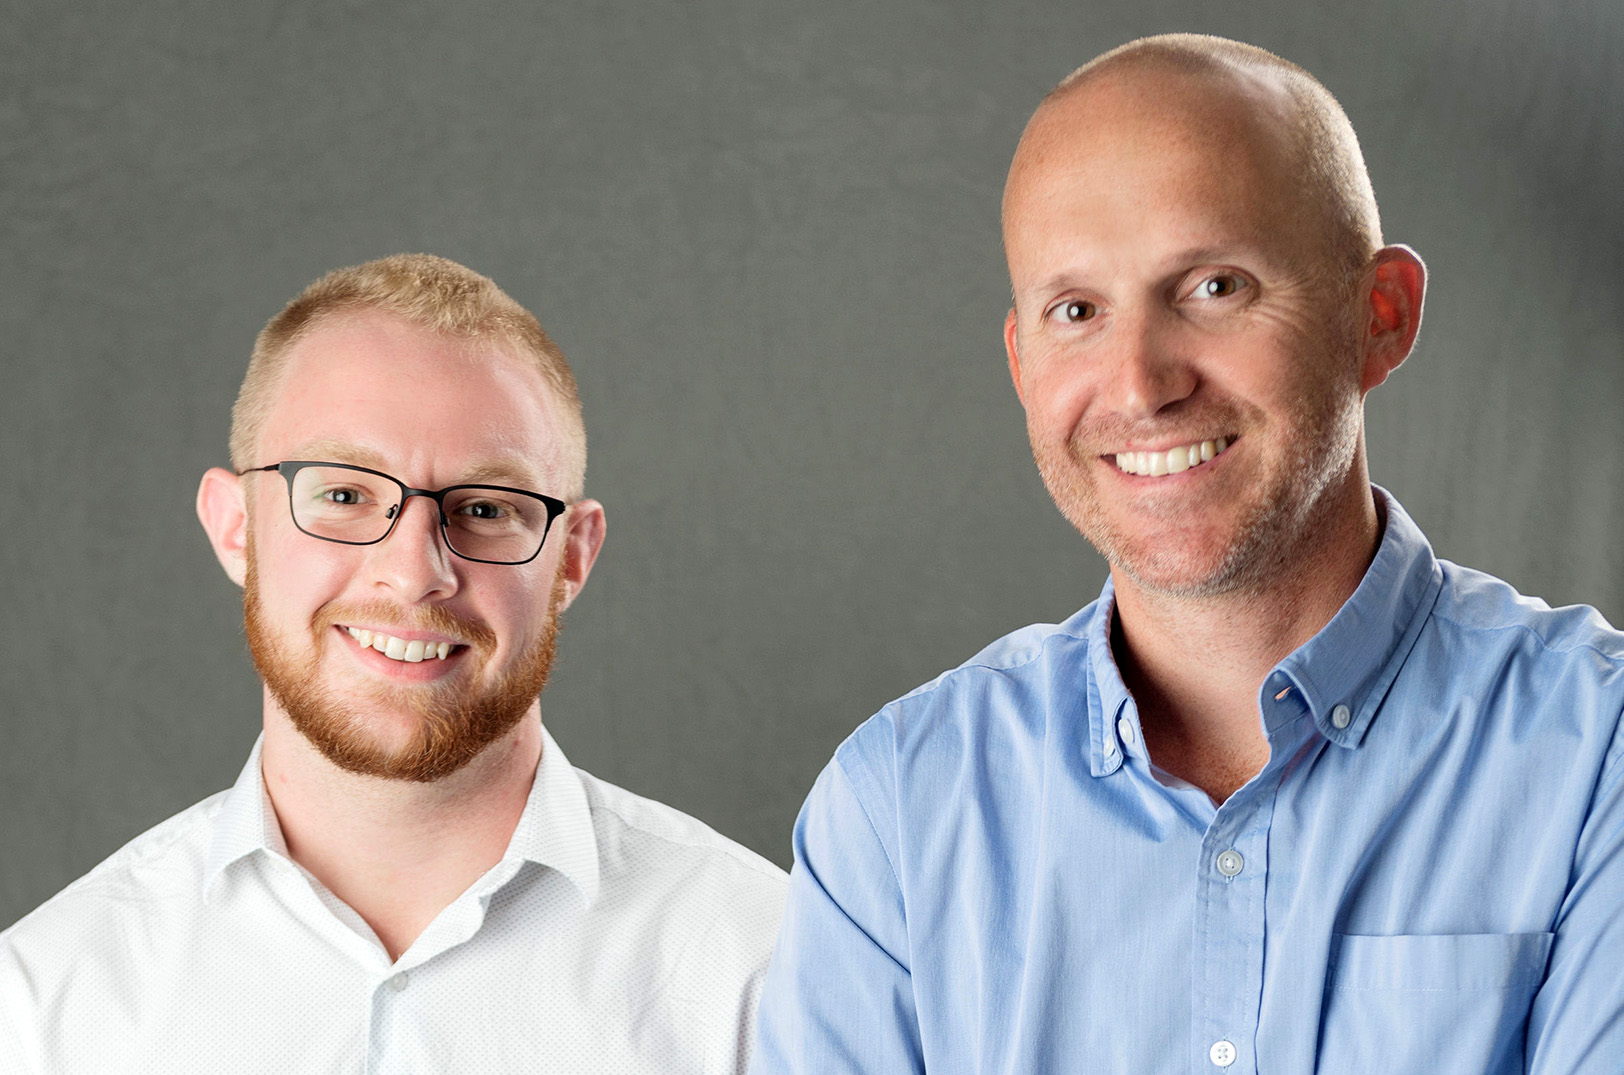 2021 Startups to Watch: LaborChart constructs high-growth mindset built on value, resiliency